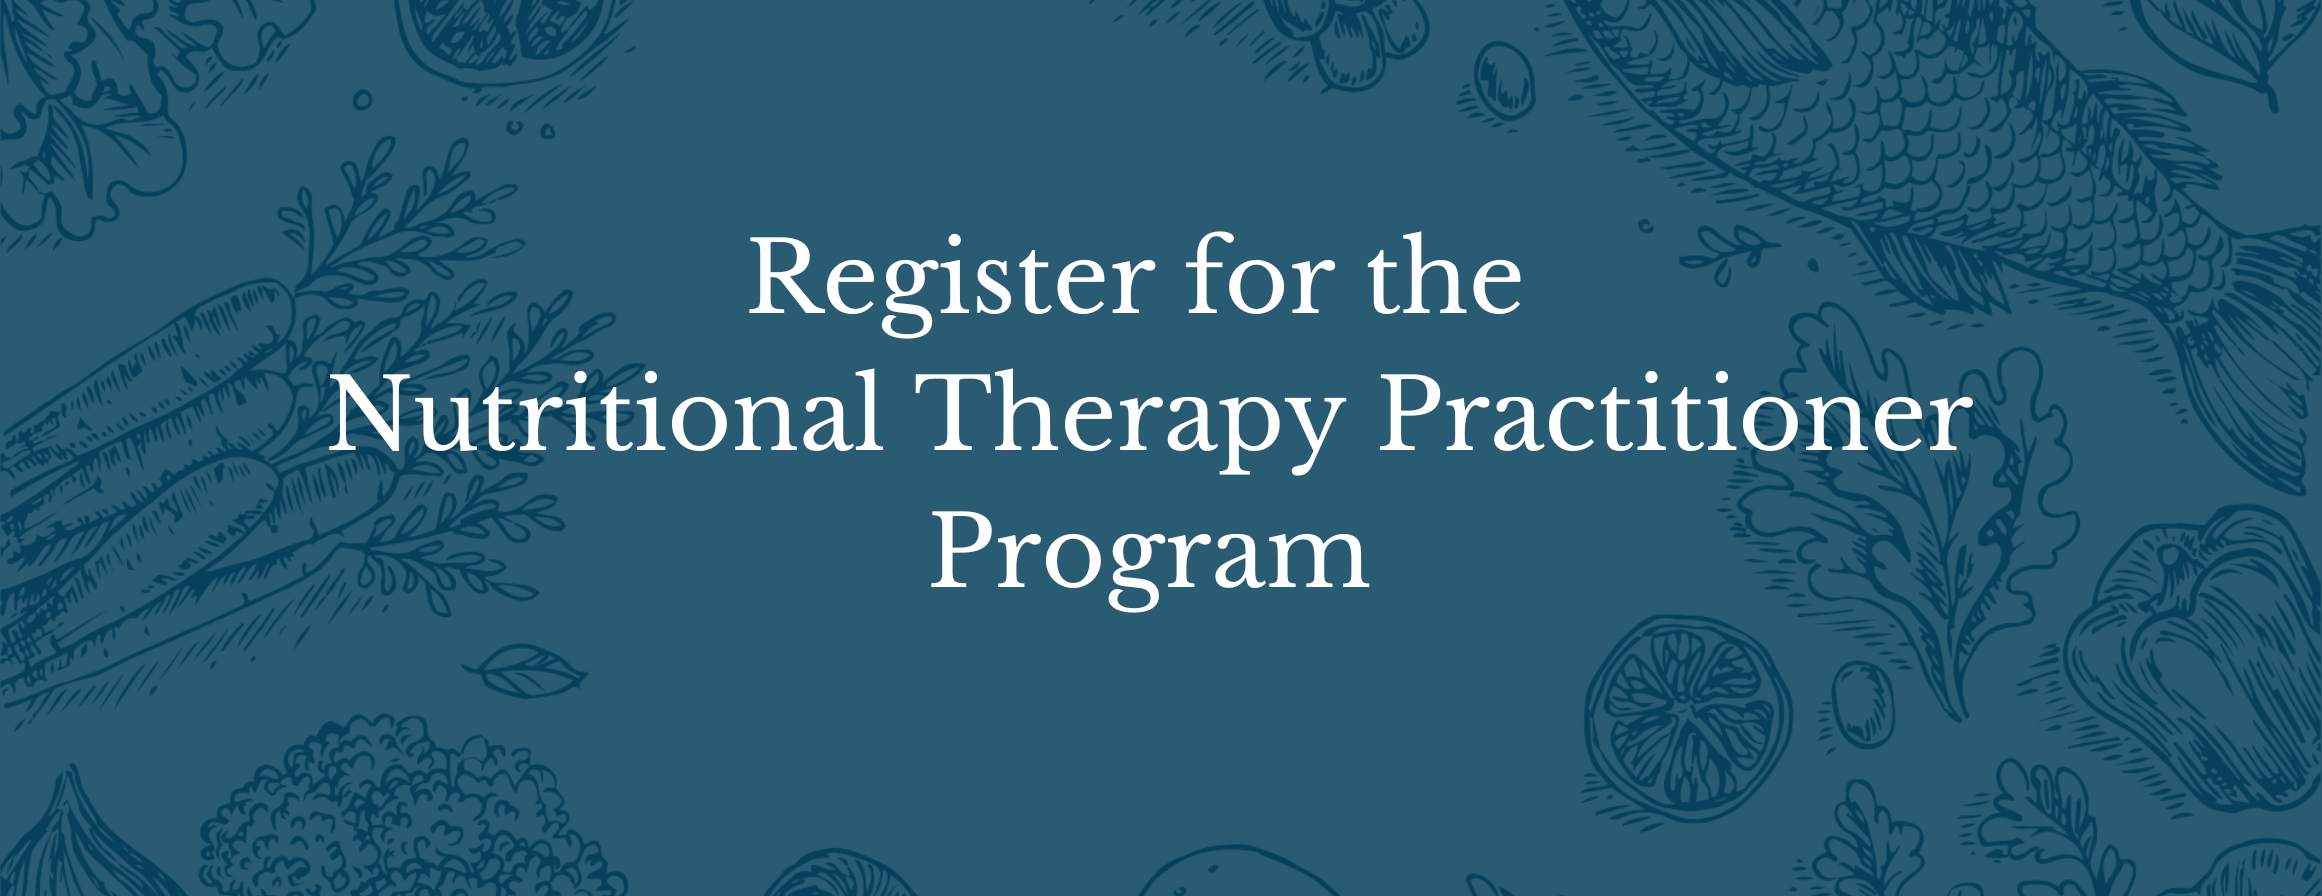 Register for the Nutritional Therapy Practitioner Program